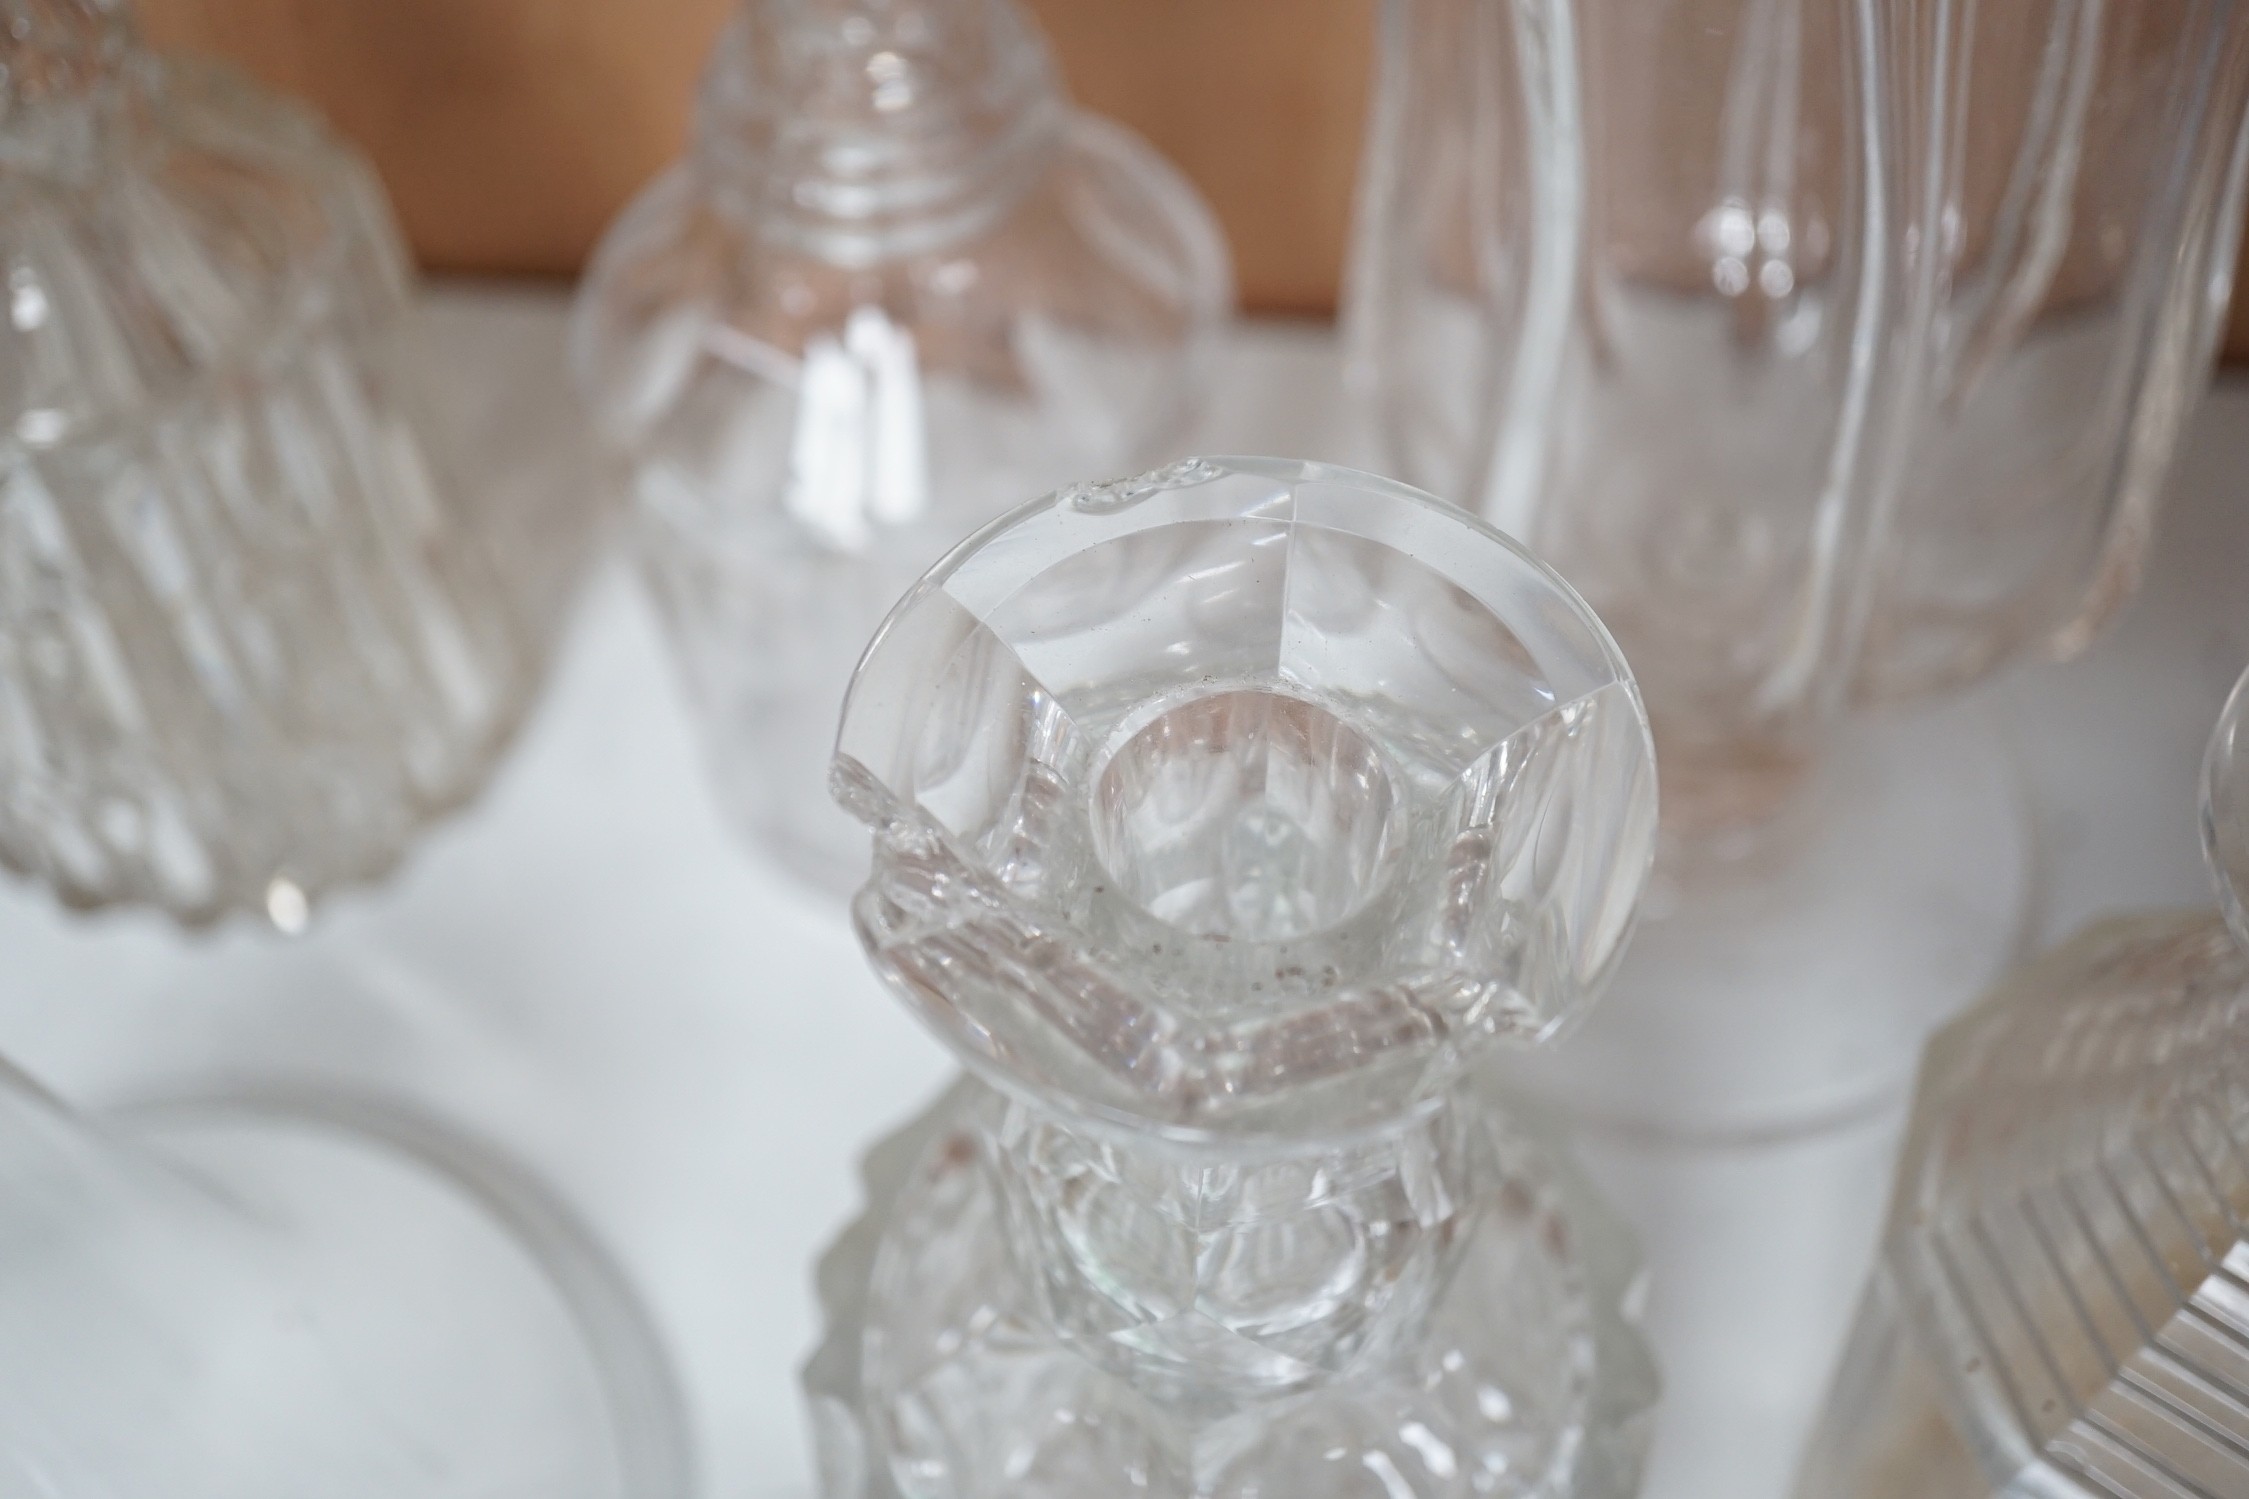 A mixed collection of 18th and 19th century glassware